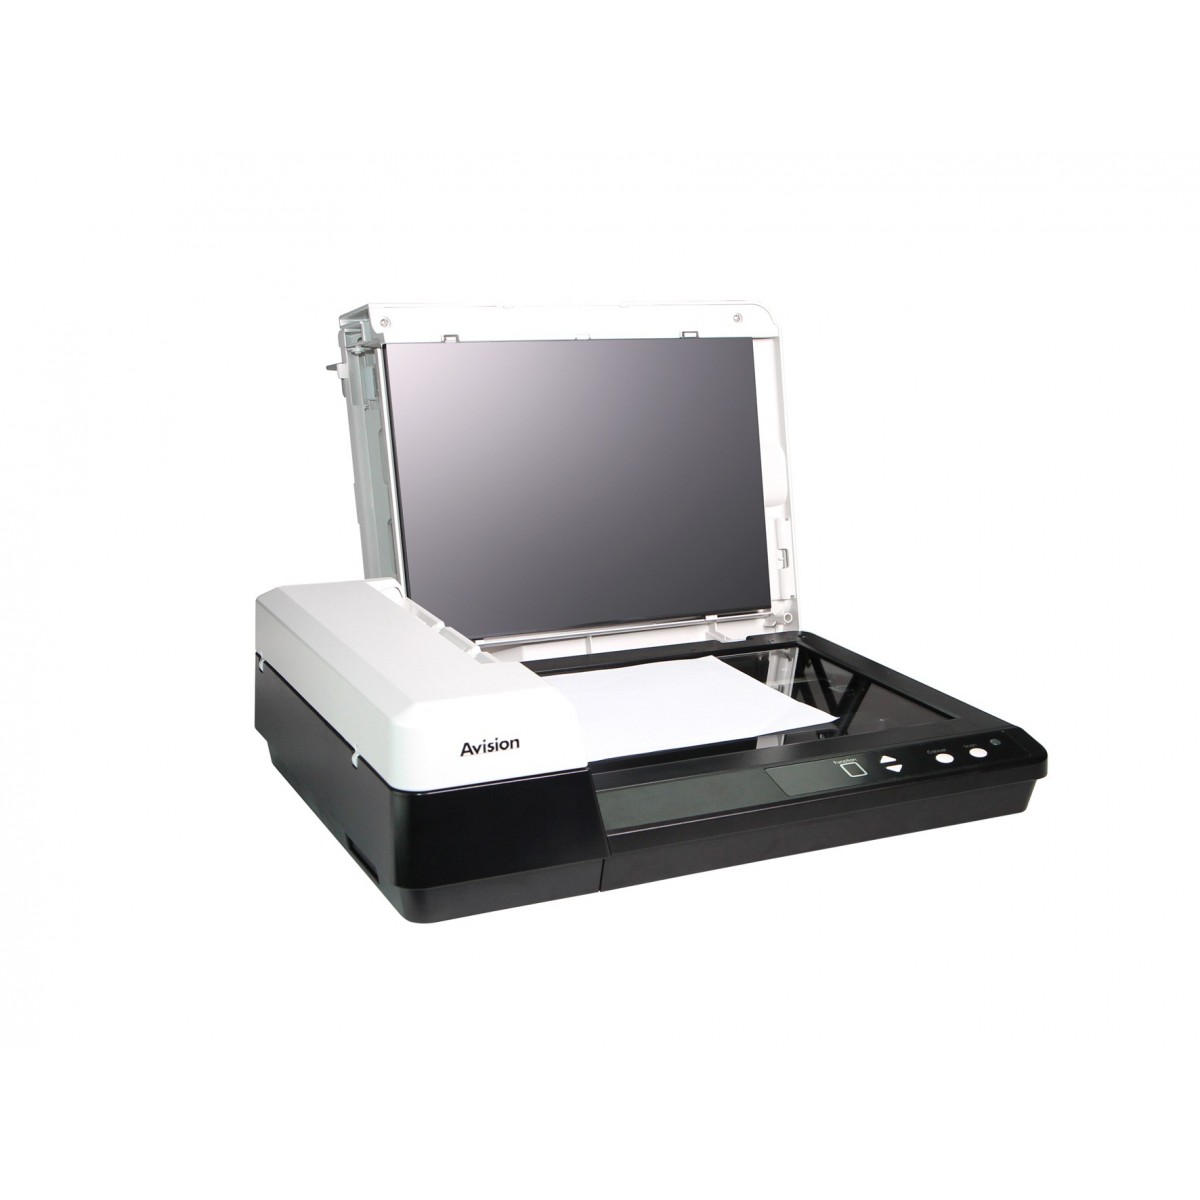 Avision AD130 A4 Dokumentenscanner - Document Scanners - A4